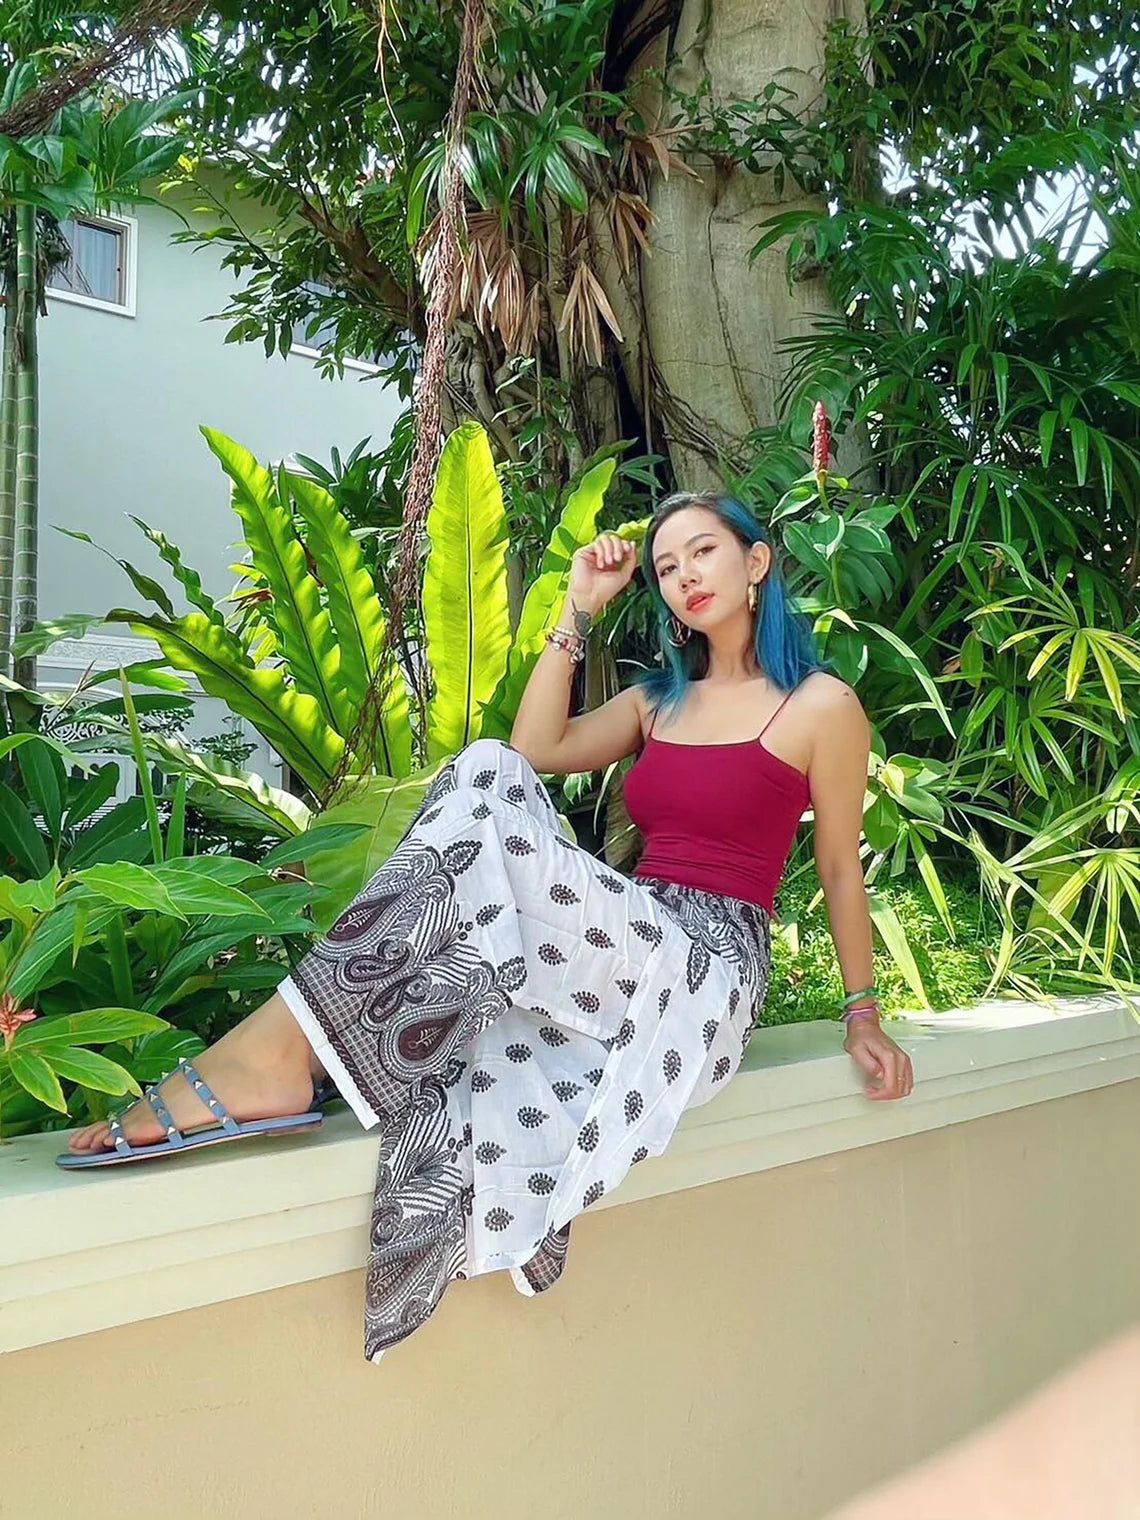 A beautiful lady is sitting on a ledge, surrounded by lush greenery, wearing boho wrap pants with a distinct pattern and a red top